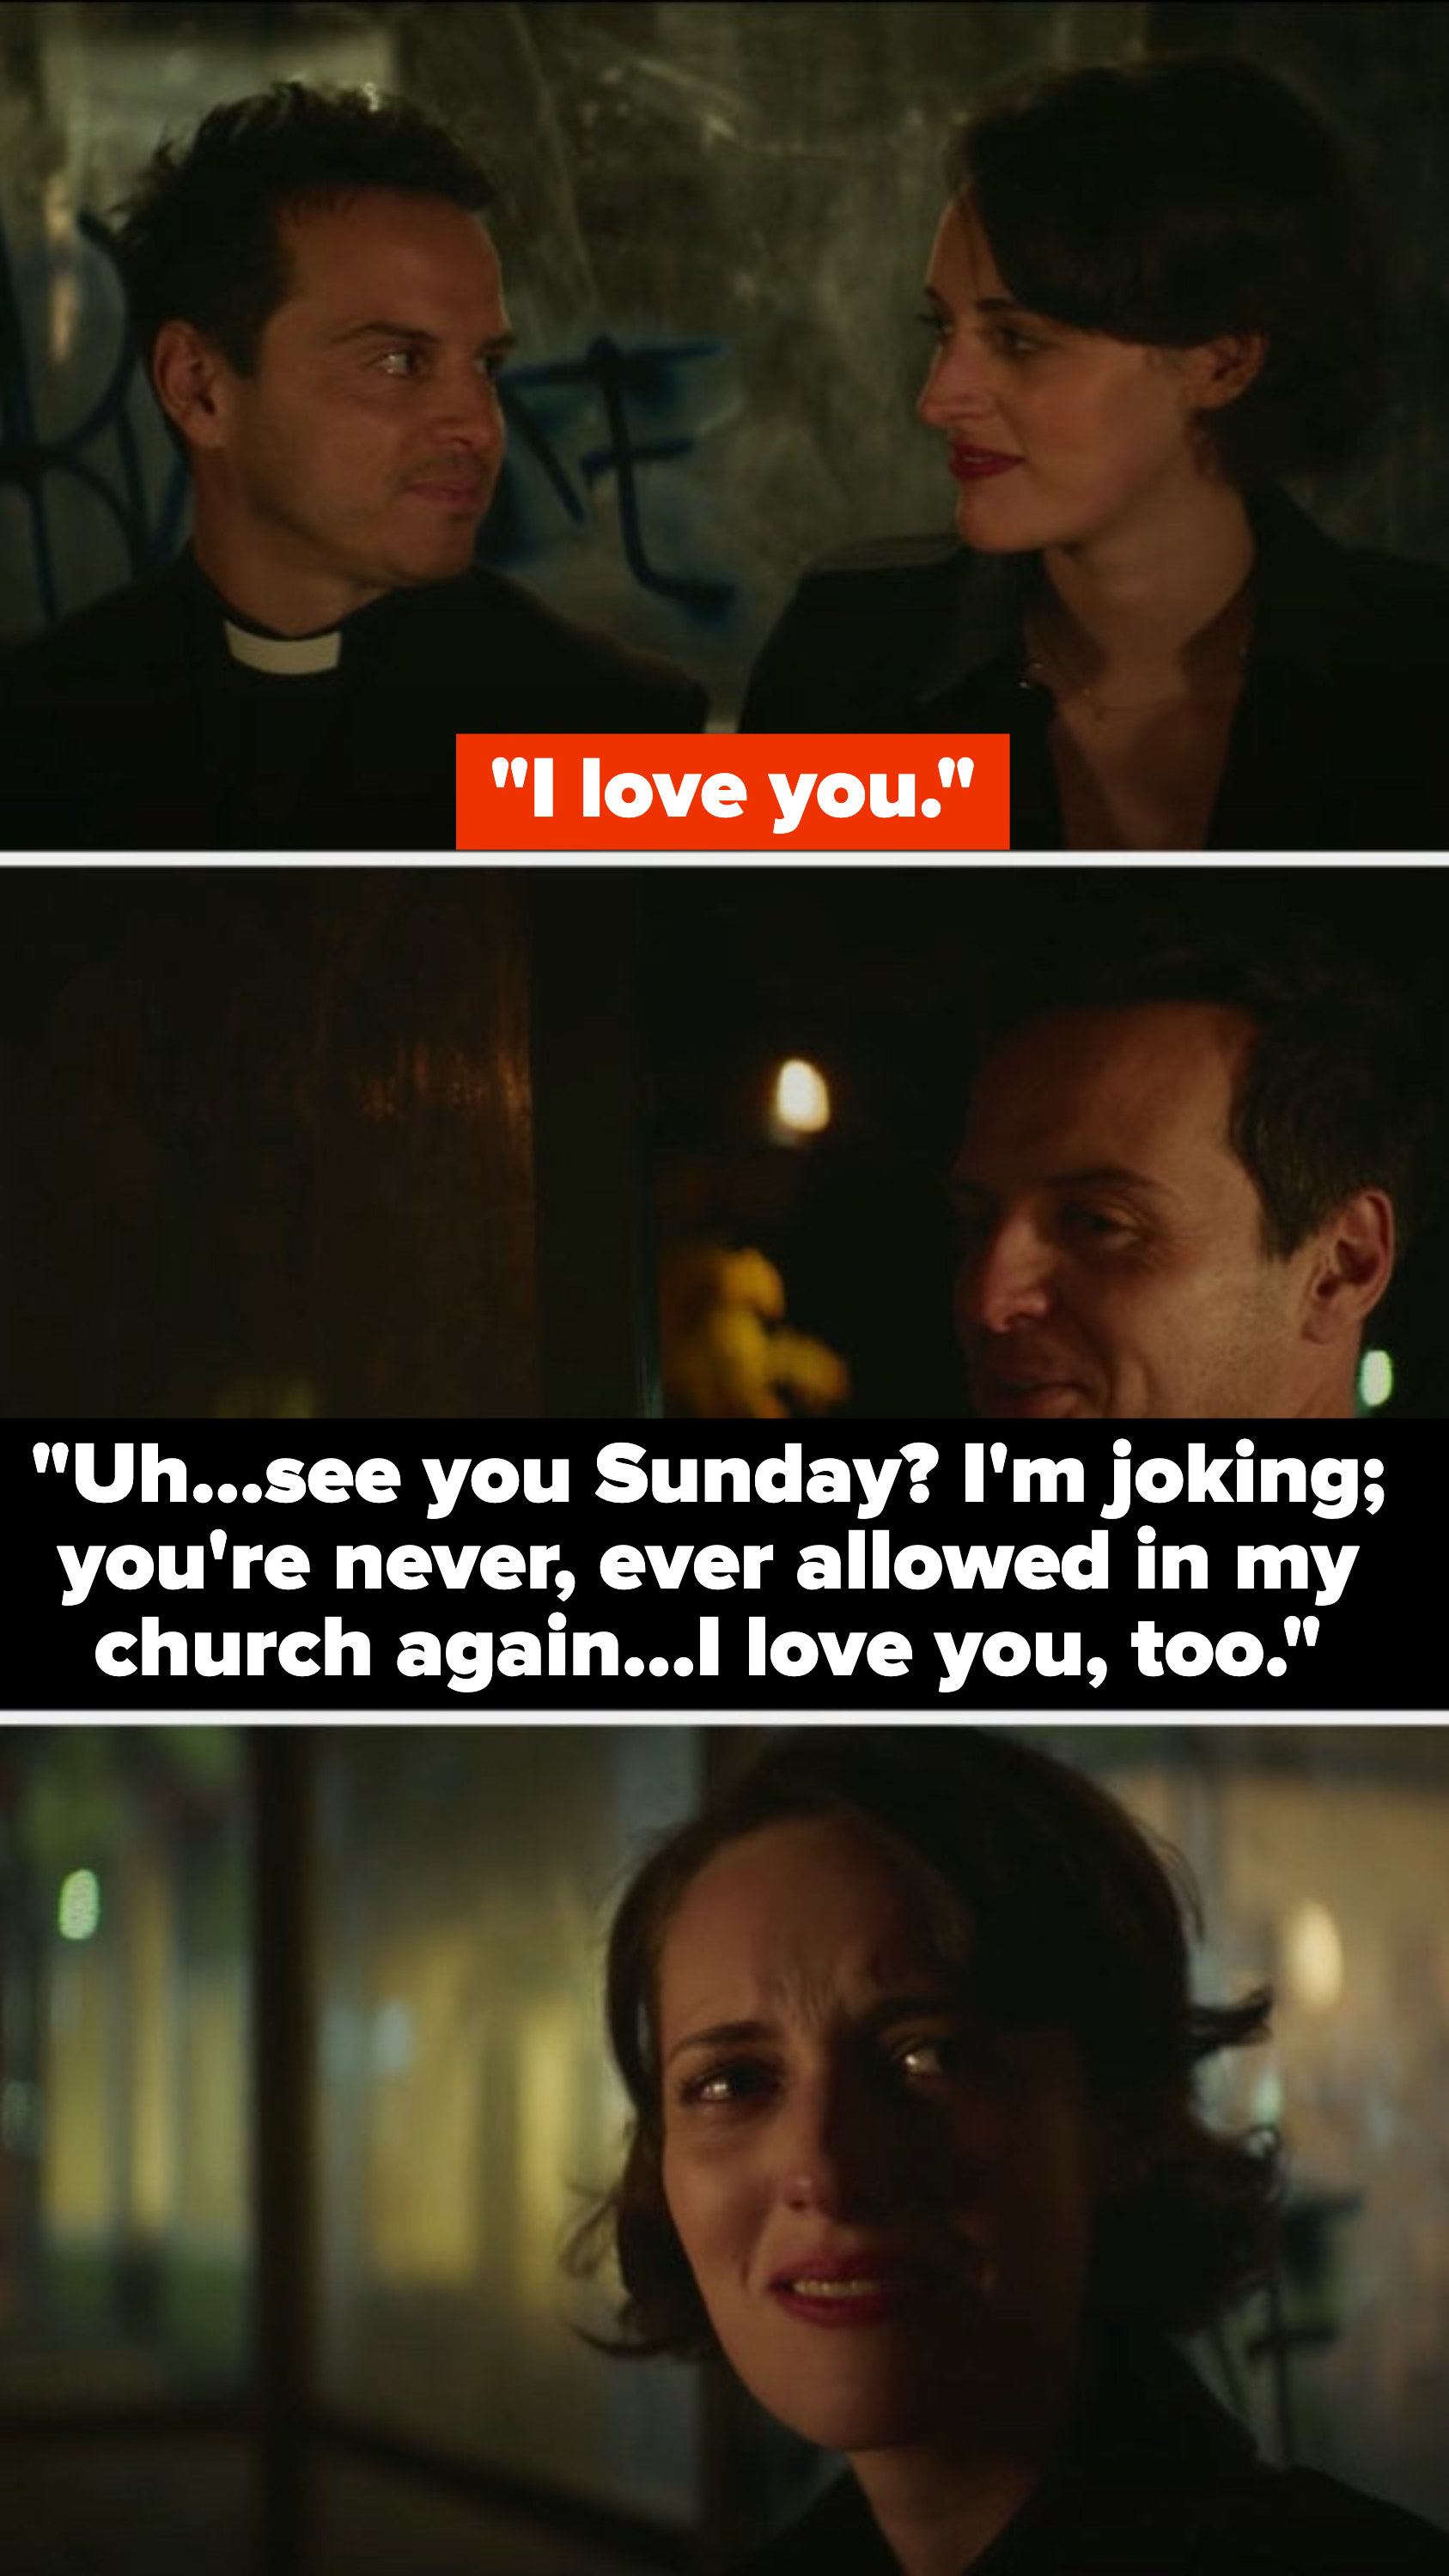 Fleabag tells the priest she loves him, and he jokes that he&#x27;ll see her on church sunday before saying she&#x27;s never allowed in his church again, then saying he loves her too